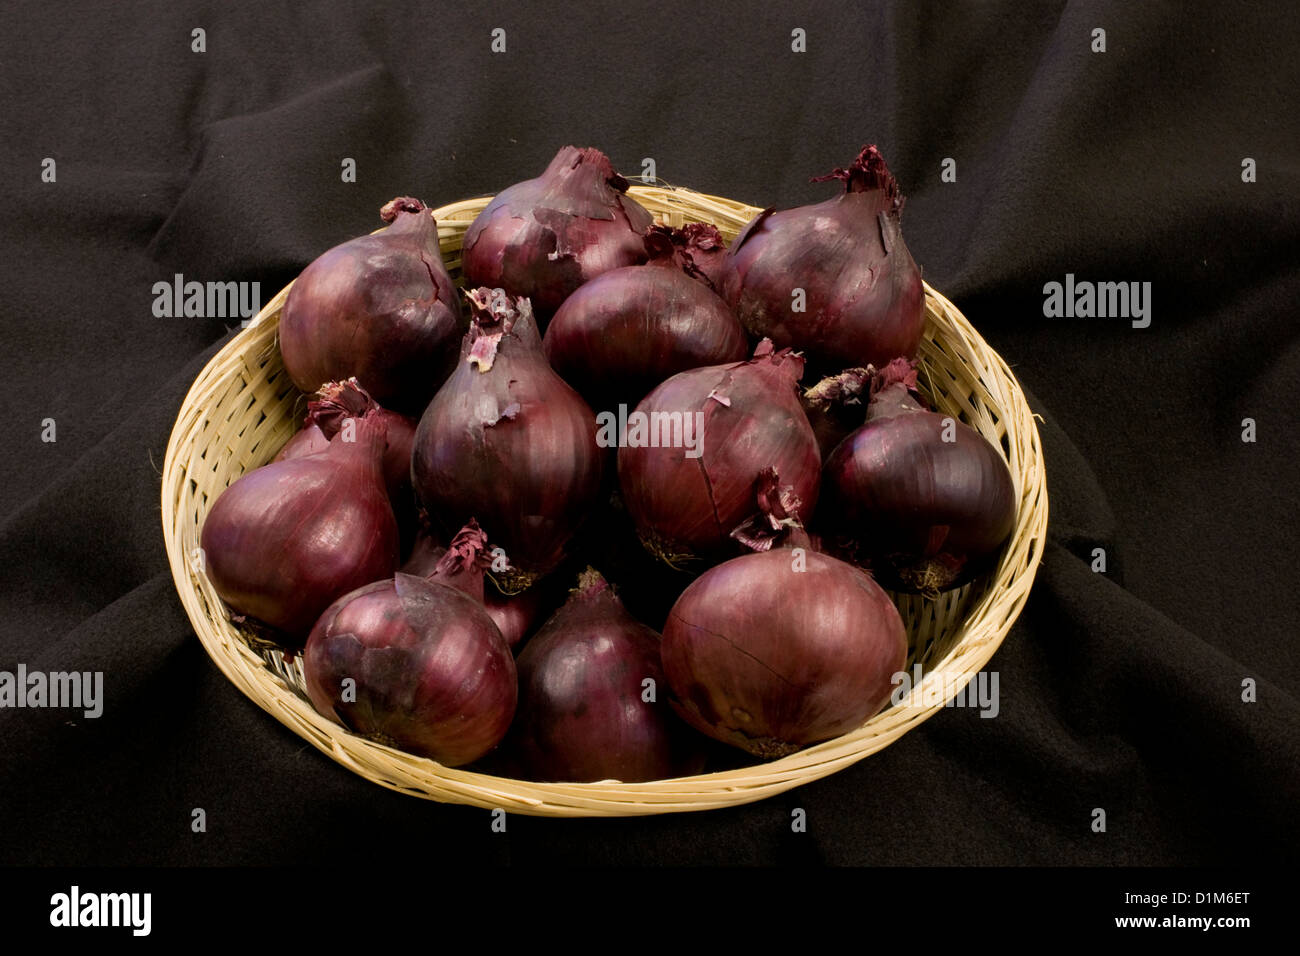 Basket of Red Onions Stock Photo